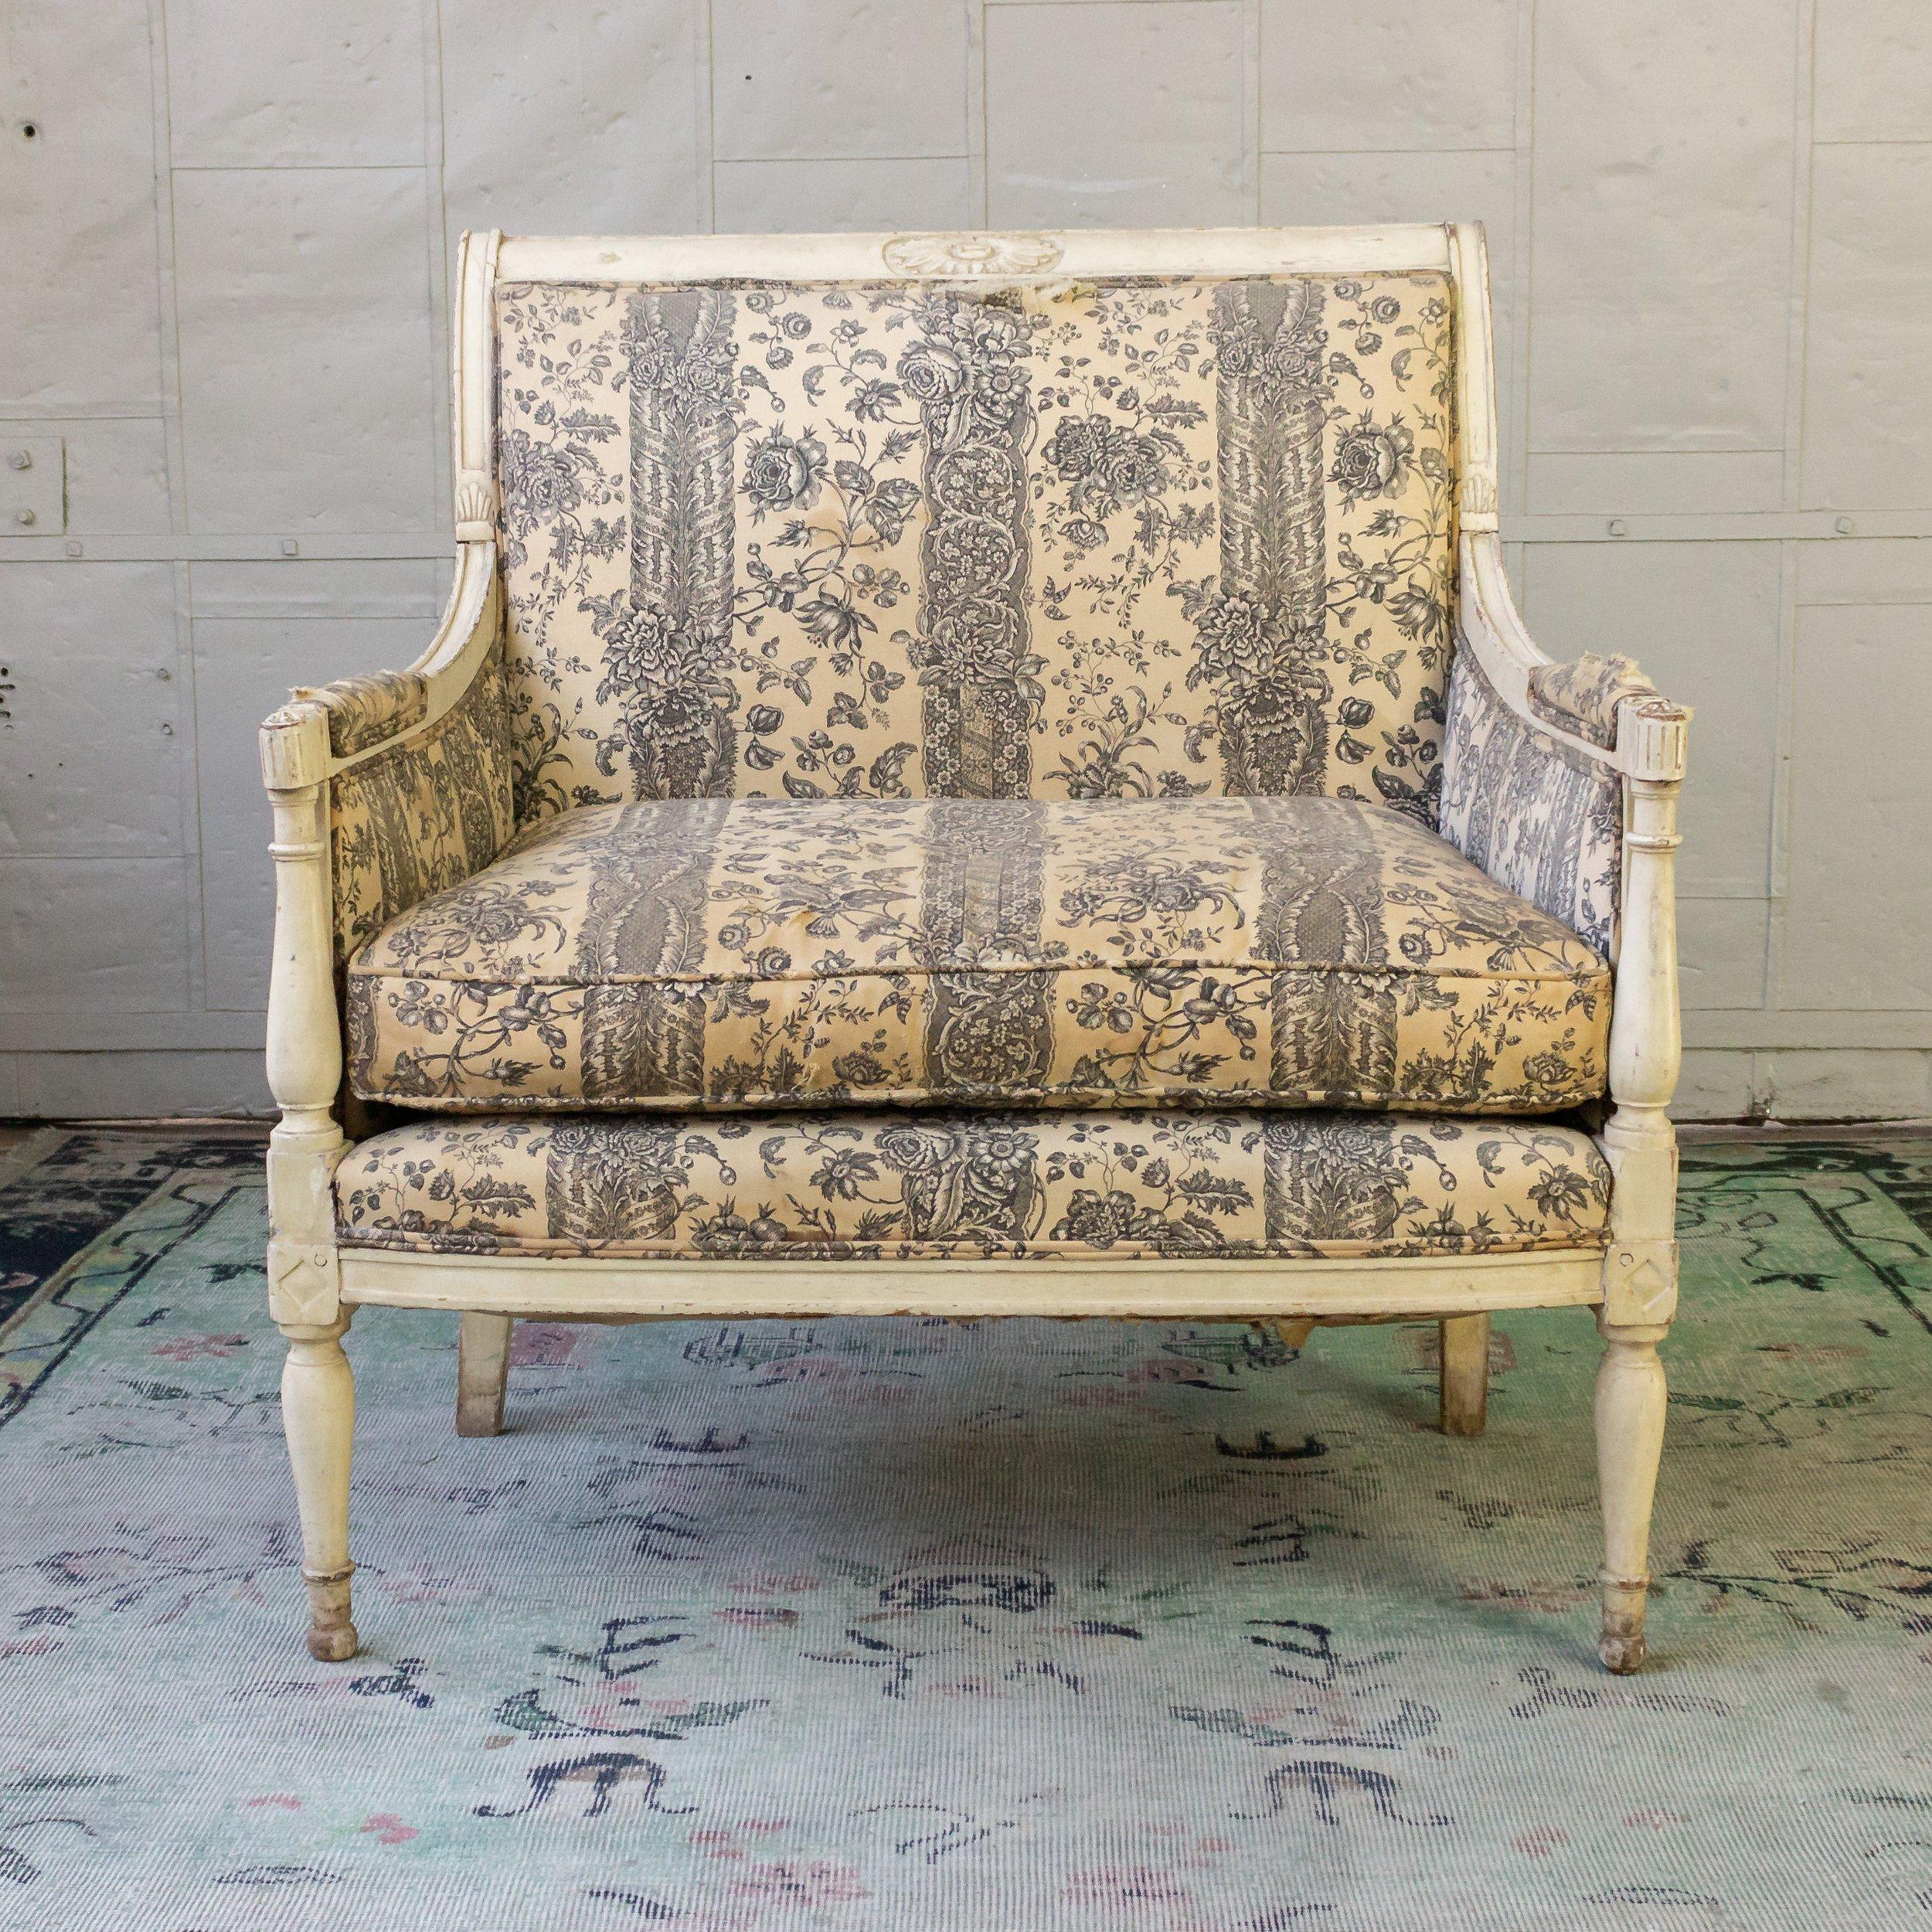 An exceptional 19th century French Directoire style armchair. This large Directoire style fauteuil is a timeless piece of French design. Featuring a beautiful white-distressed wooden frame, this armchair is characterized by its classic 19th century